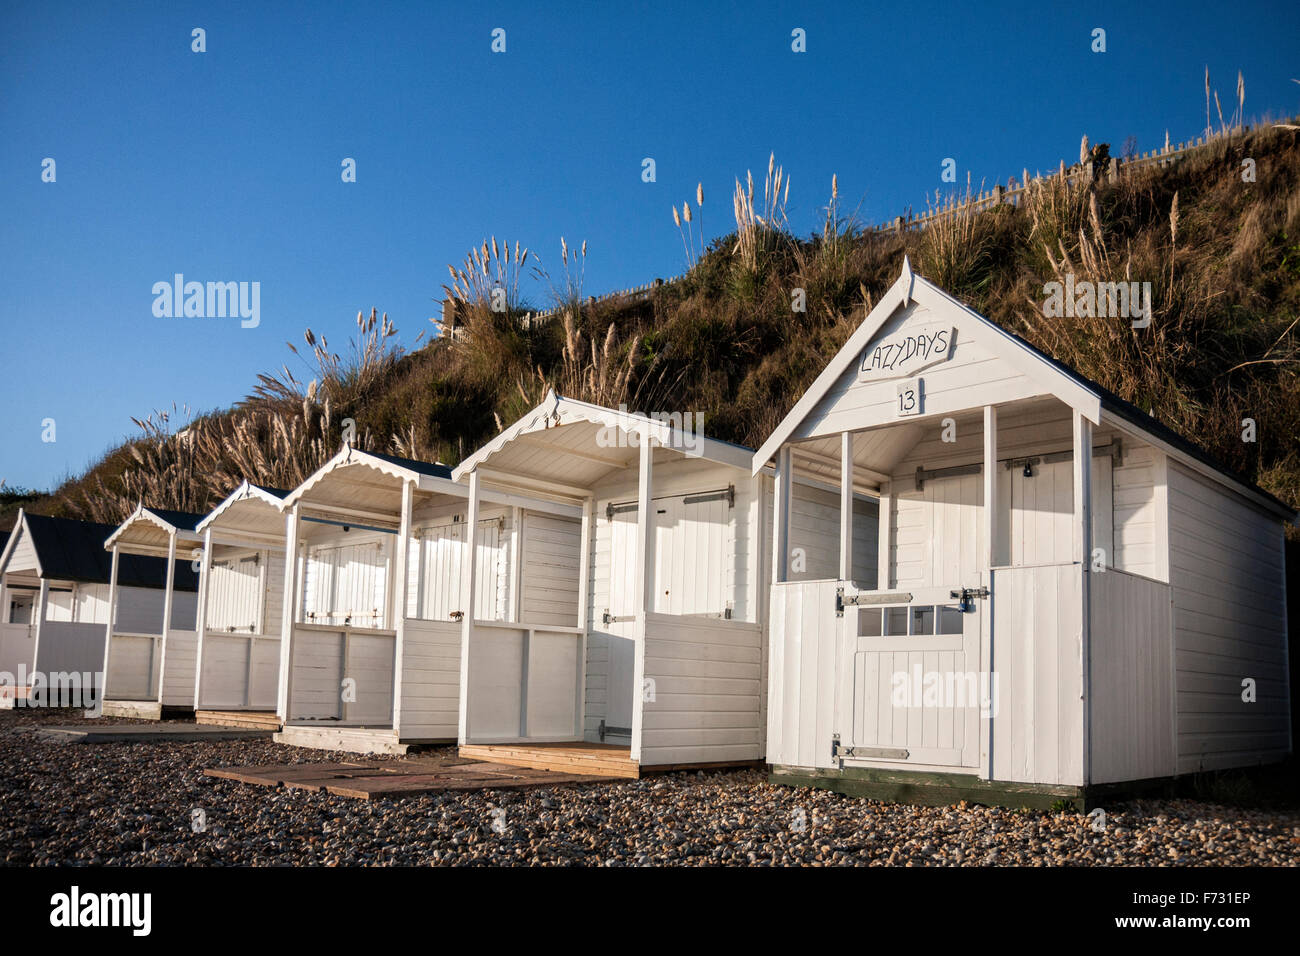 Row of white painted beach huts on the beach at Bexhill on Sea, East Sussex, England, UK Stock Photo